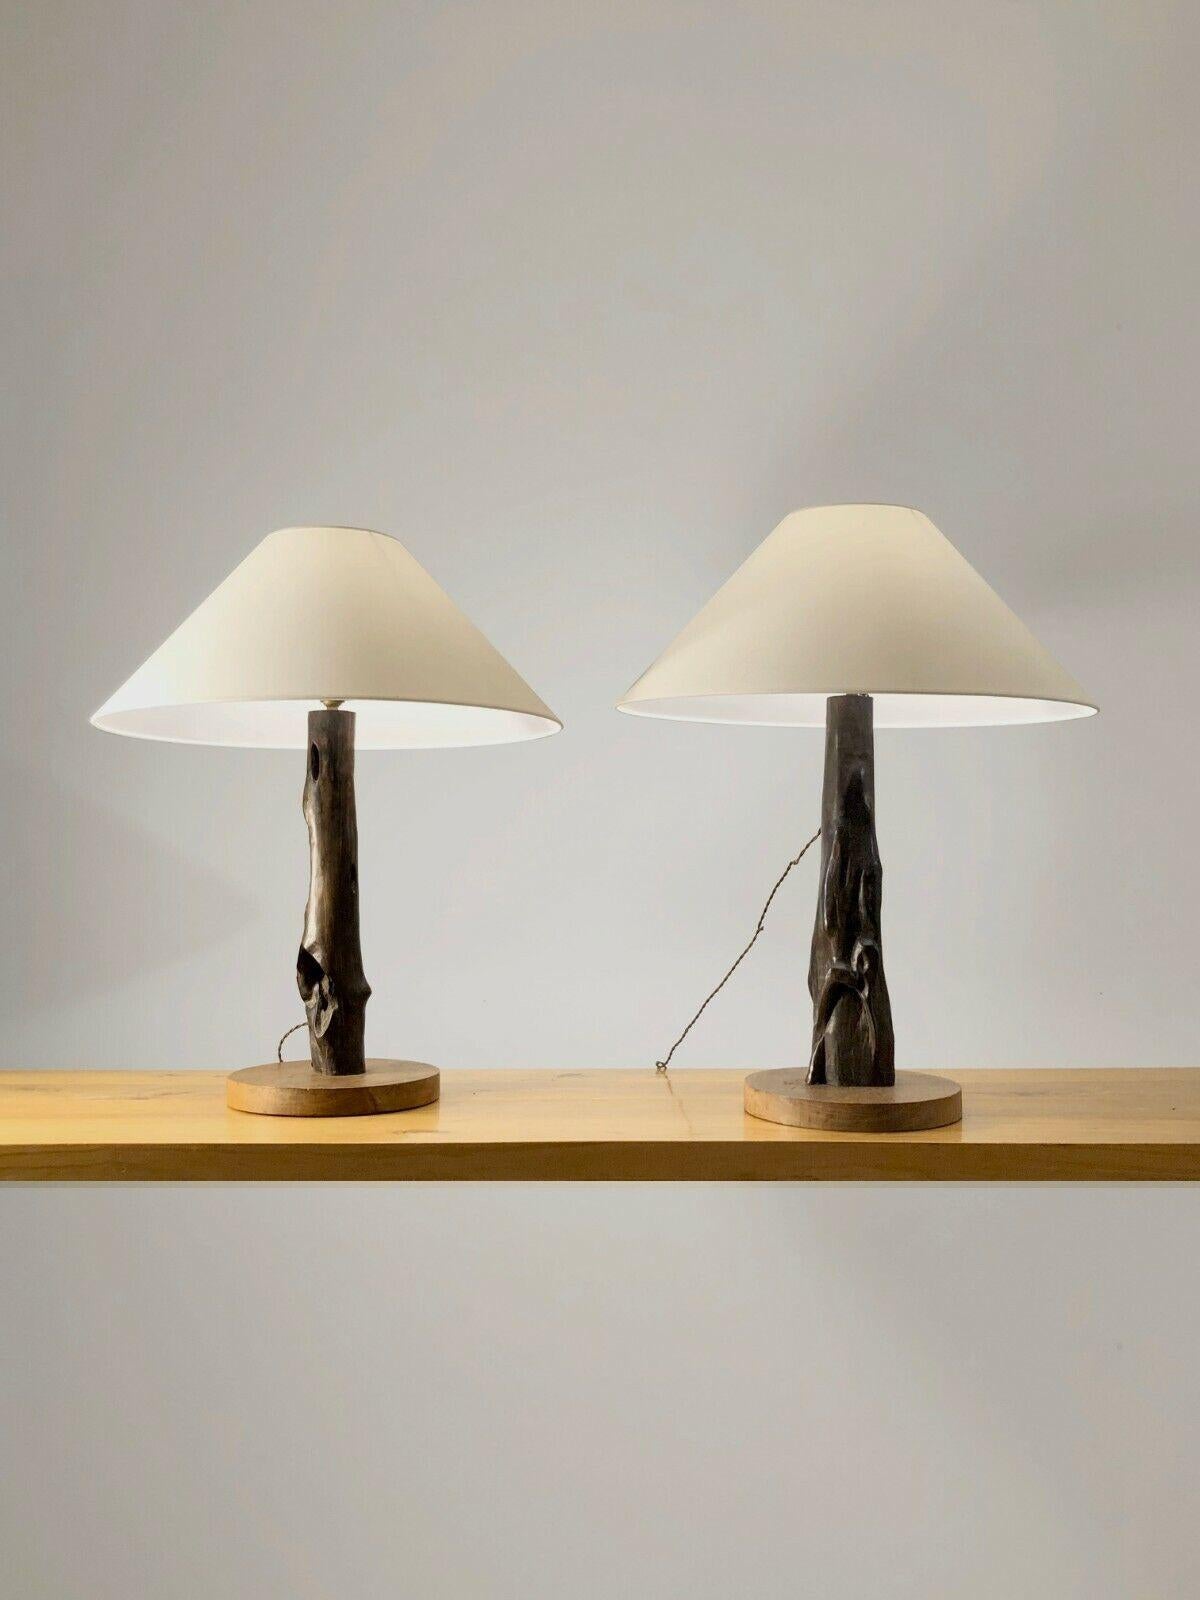 French A Pair of GIANT SCULPTURAL Wood TABLE LAMPS, NAKASHIMA NOLL Style, France, 1950 For Sale